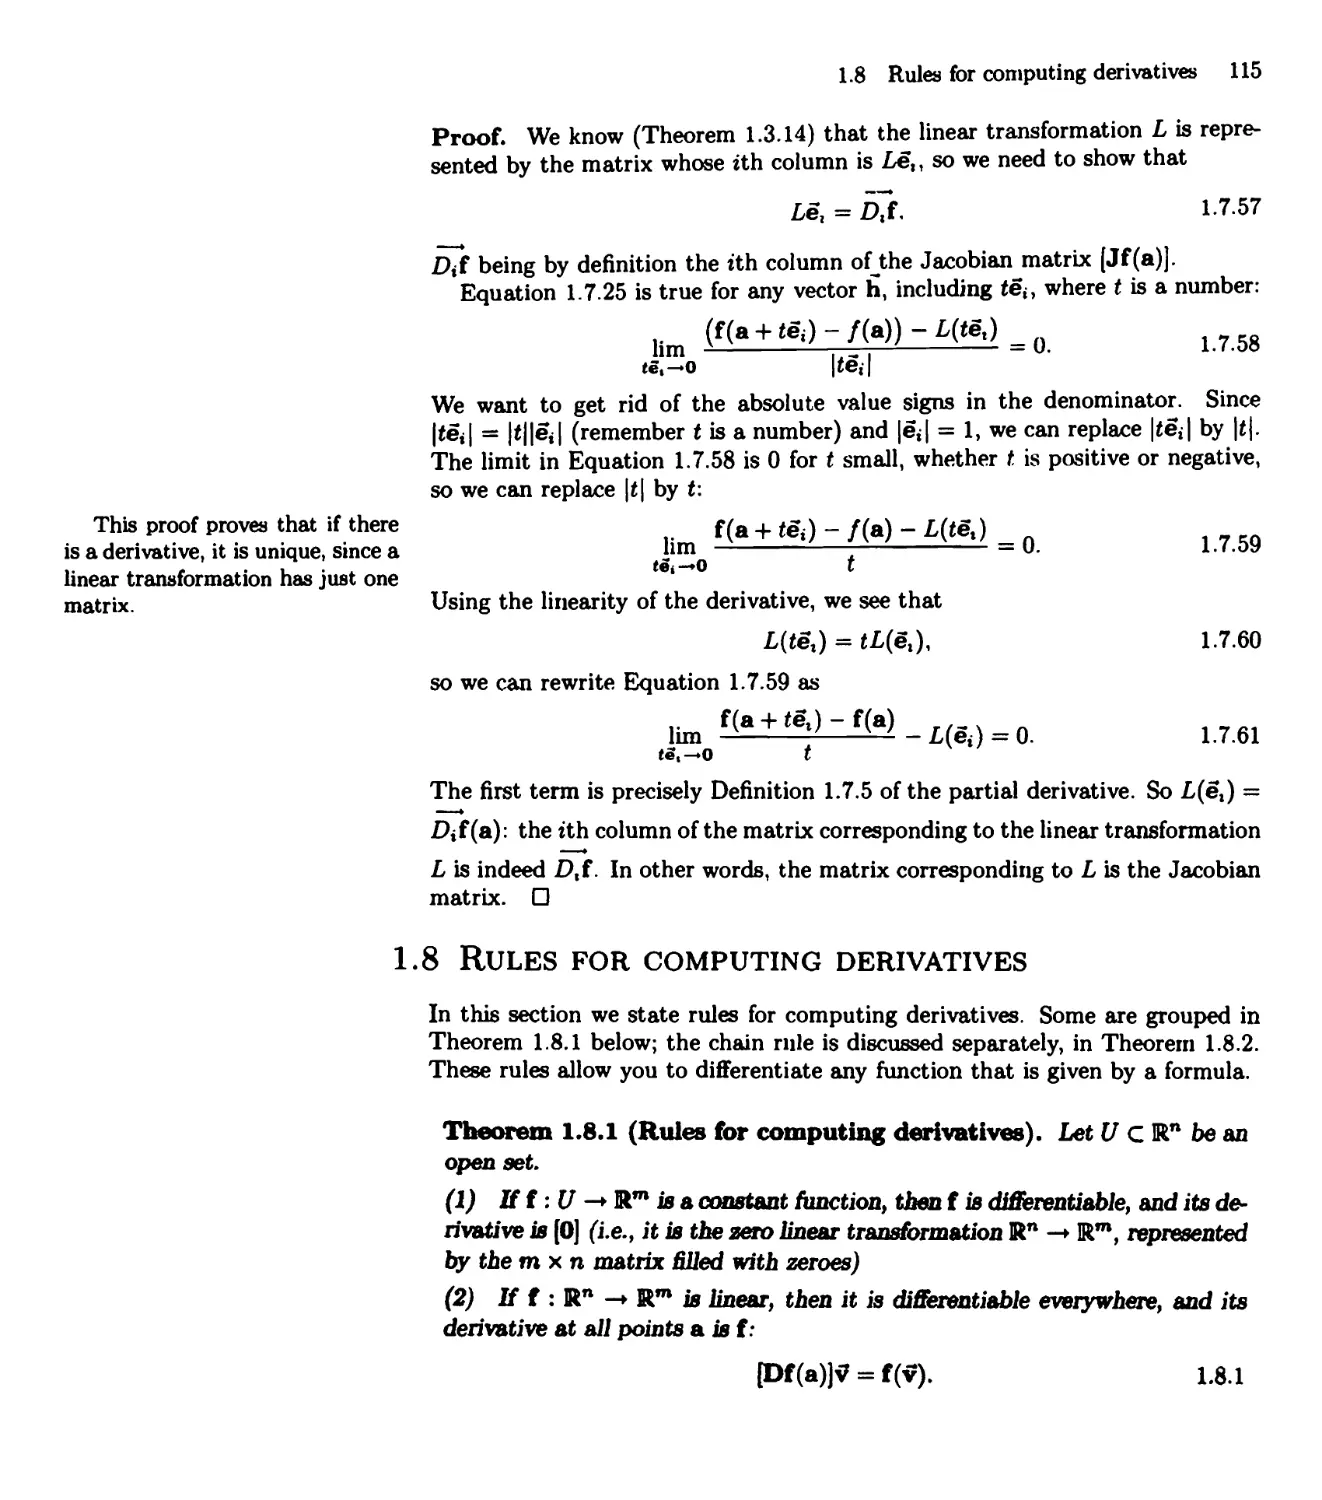 1.8 Rules for Computing Derivatives